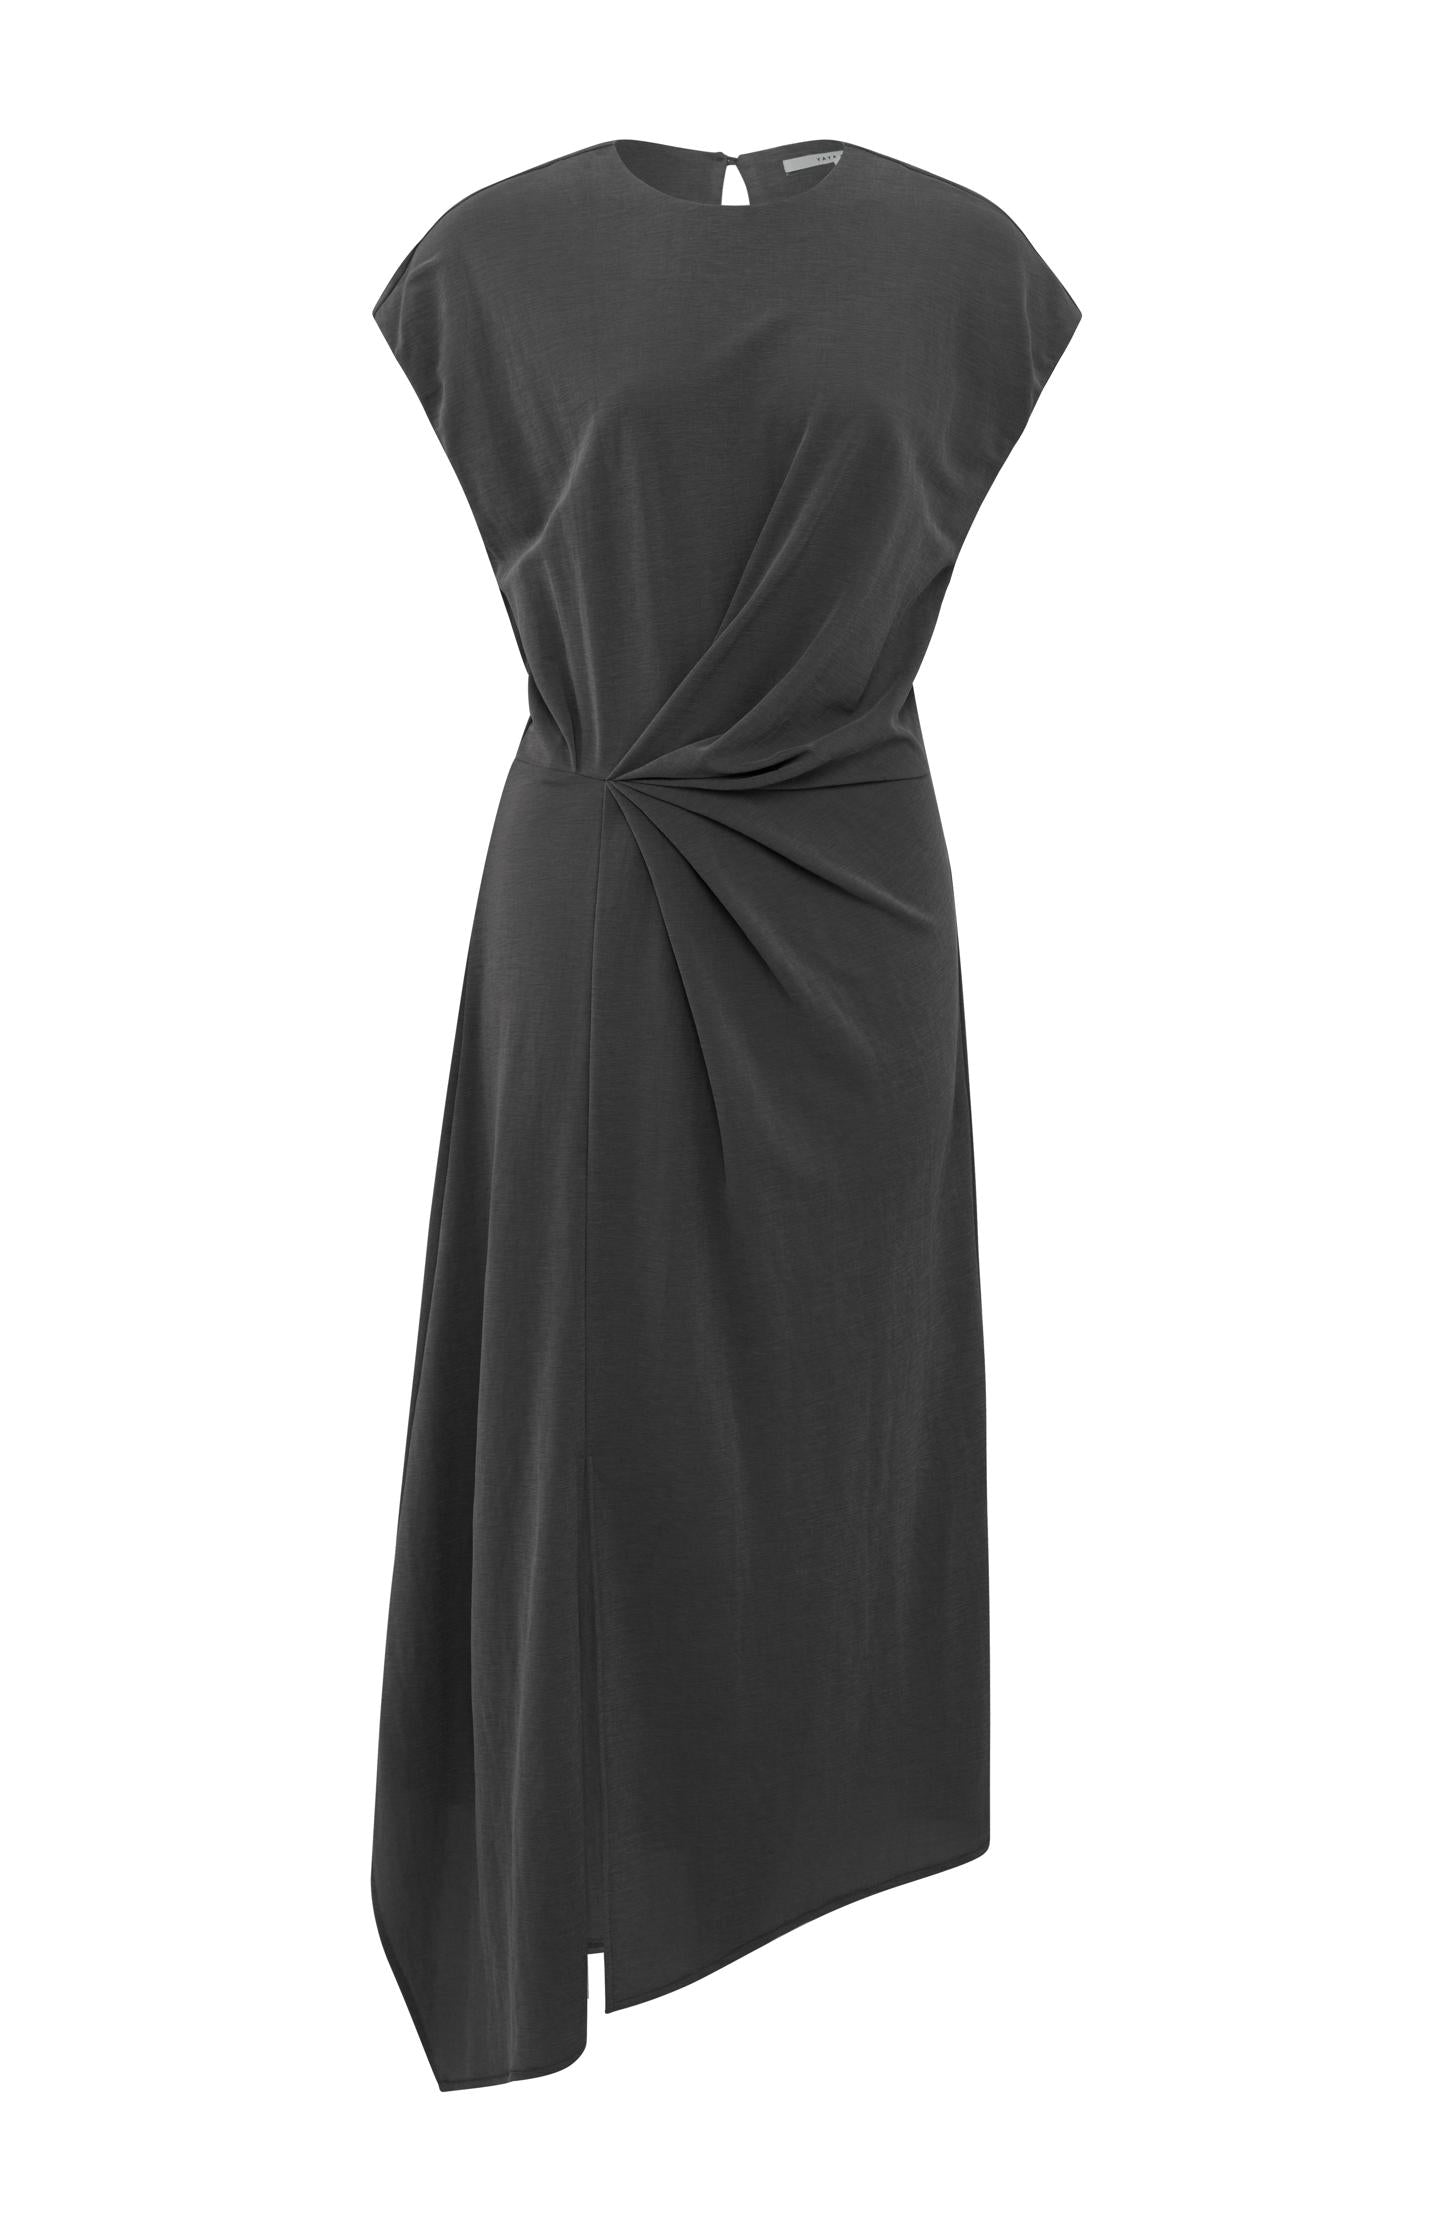 Midi dress with cap sleeves, faux wrap and pleated details - Type: product